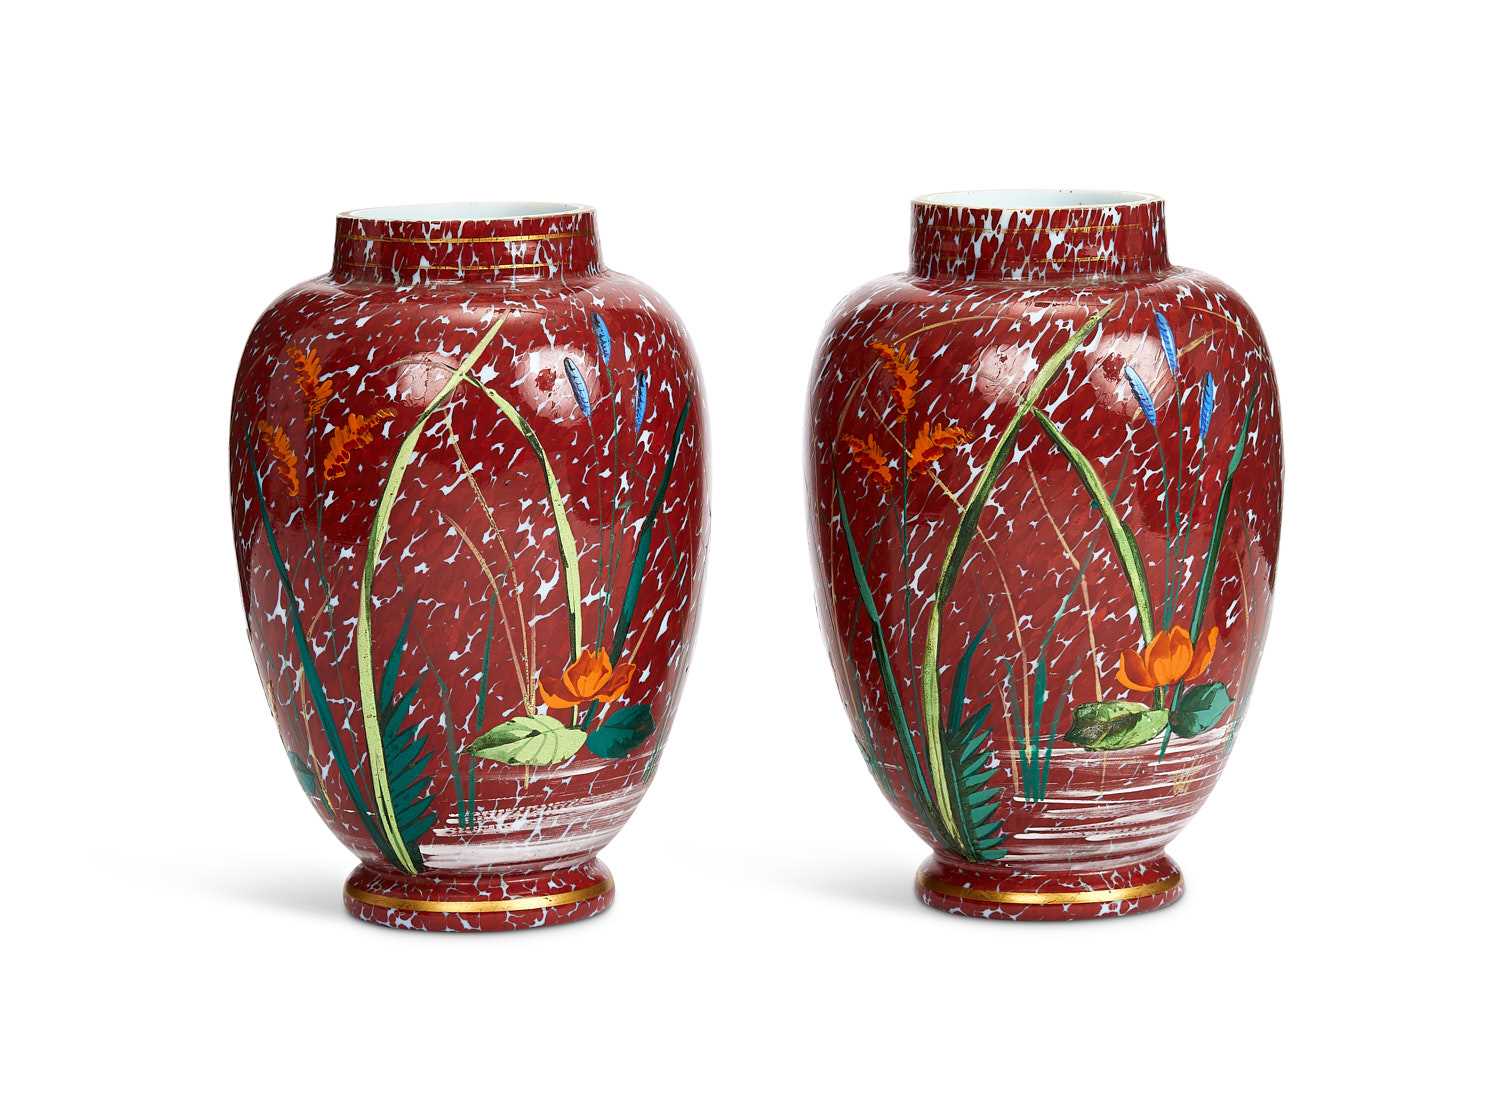 A PAIR OF LATE 19TH / EARLY 20TH CENTURY ENAMELLED GLASS VASES